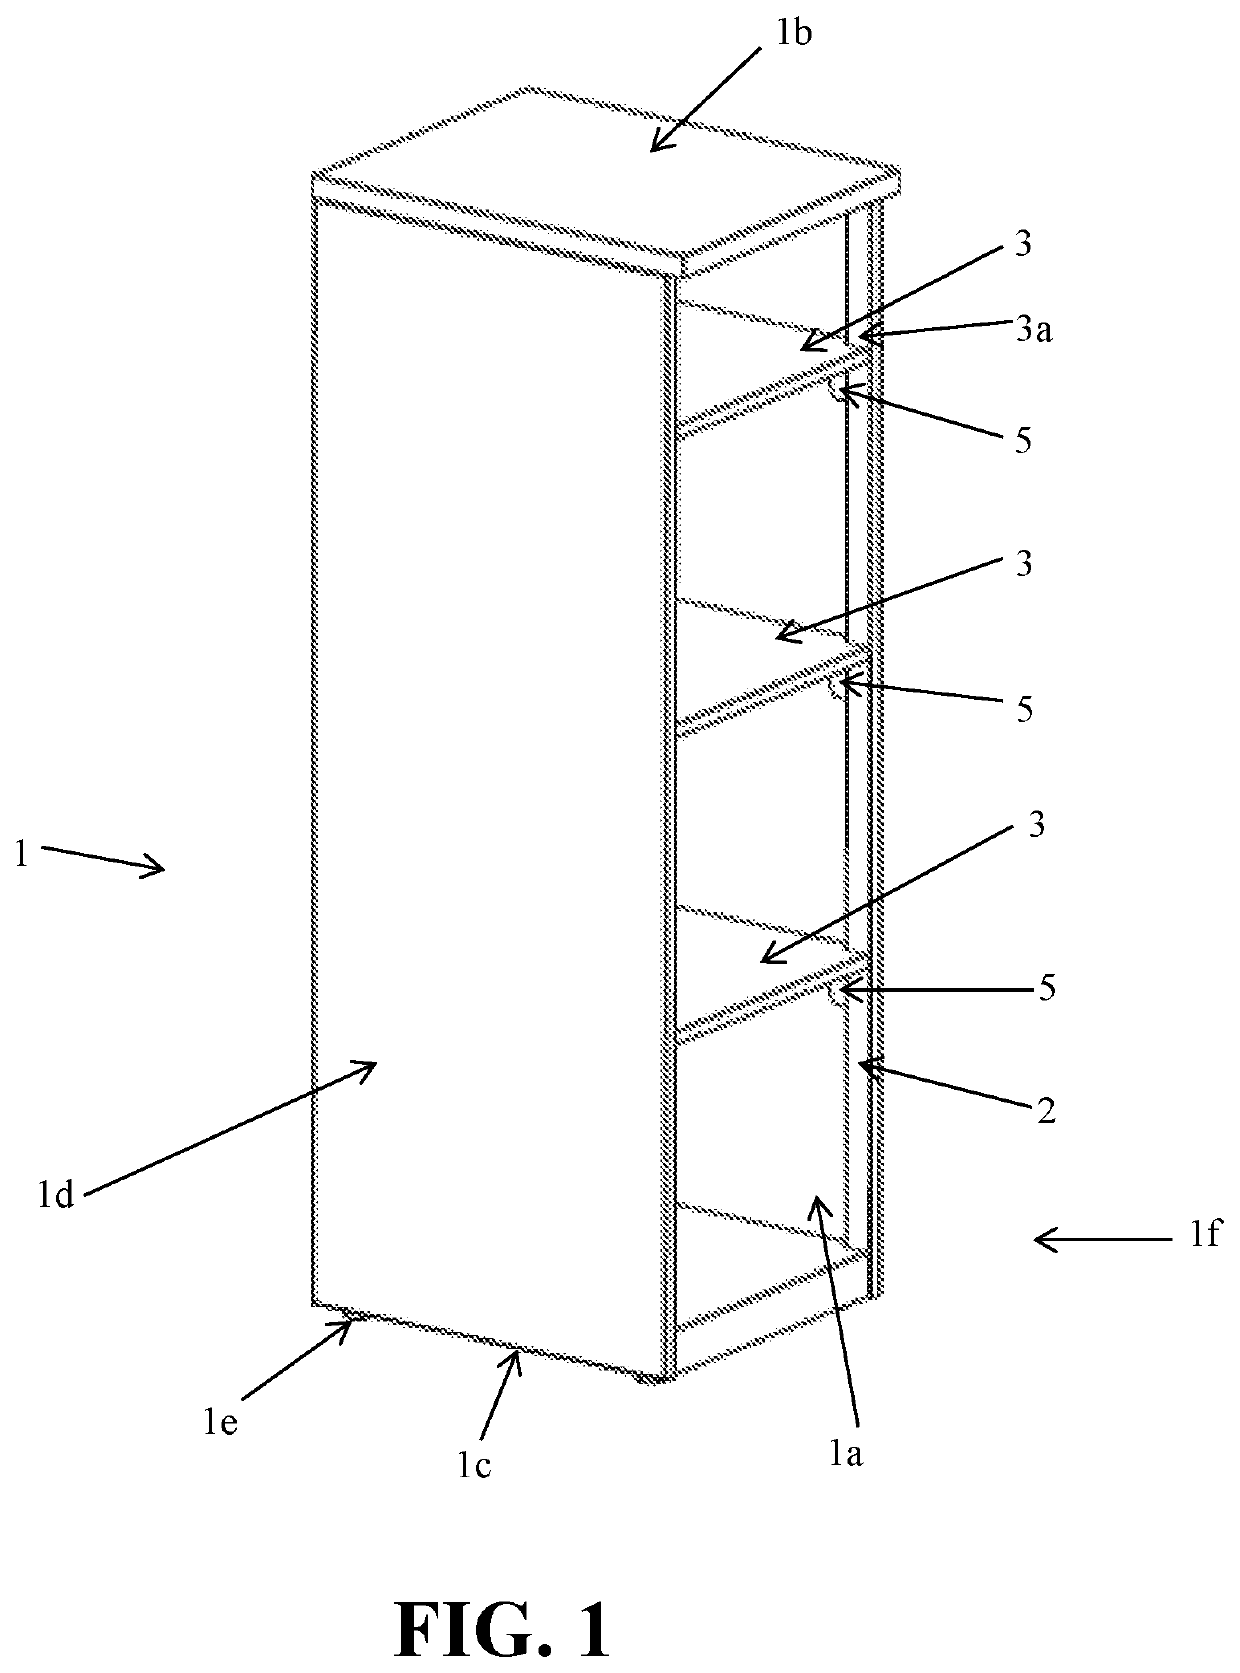 Shelving unit having reverse cantilevered bracket assembly and method of using the same